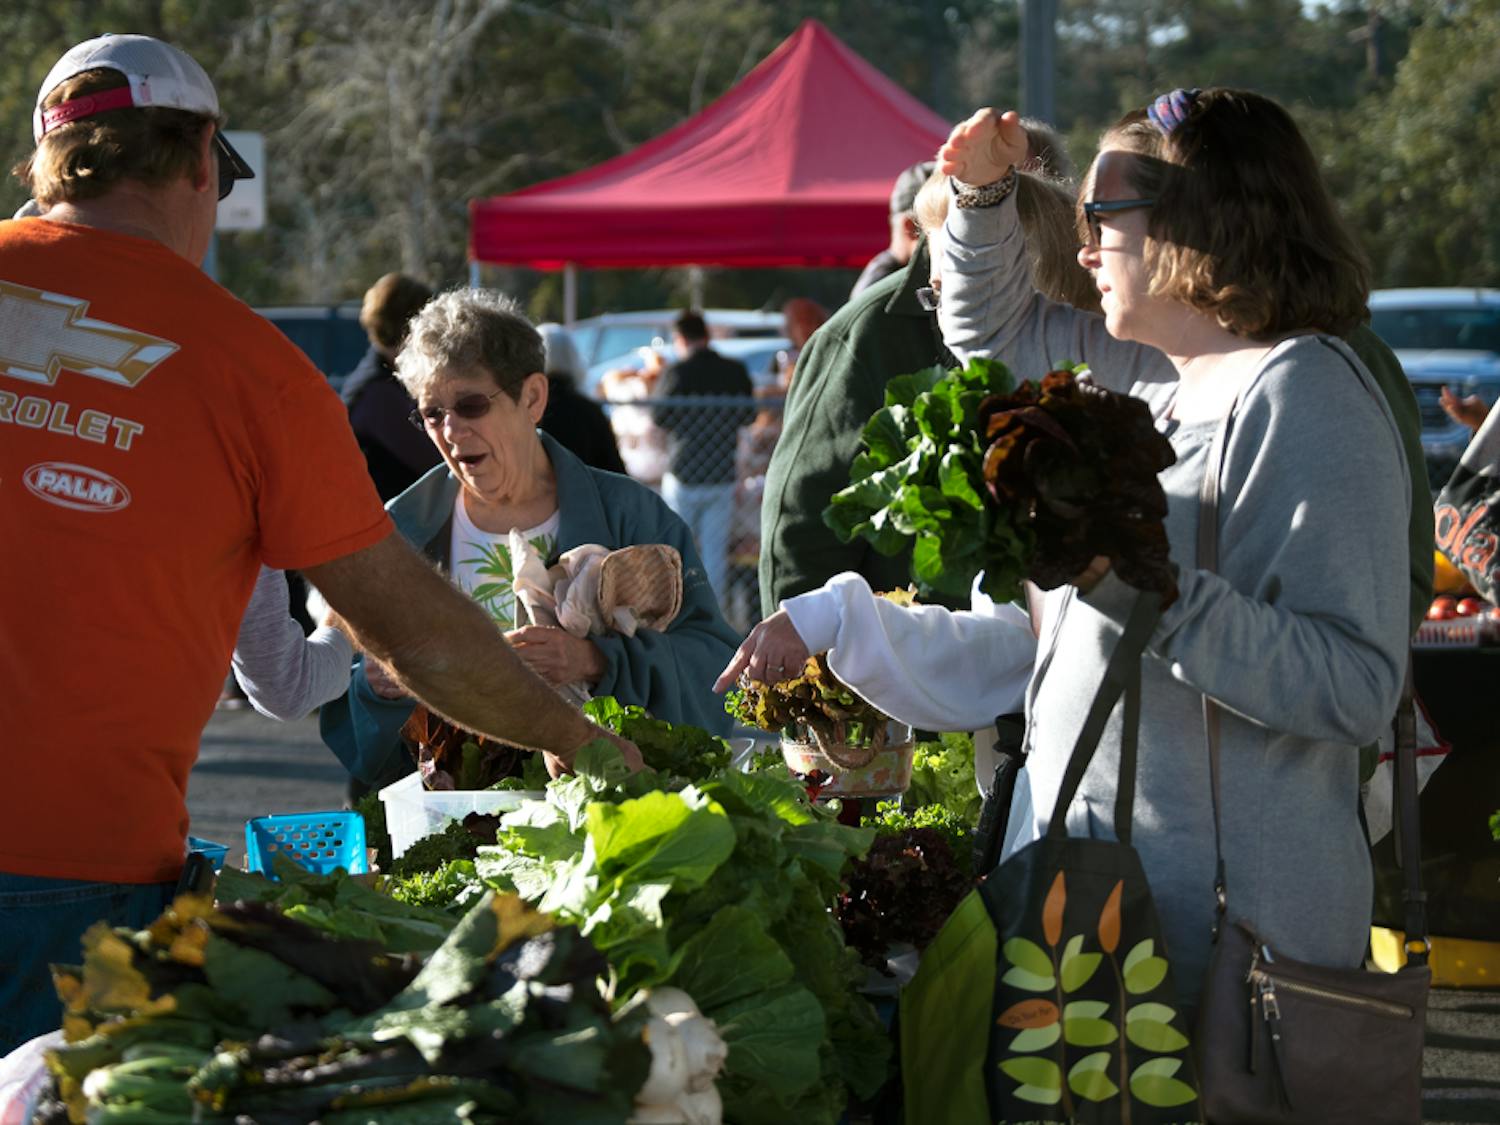 Rana Hyder, 42, right, waits to purchase vegetables from Jones Family Farms Saturday at the Alachua County Farmers Market,  at 5920 NW 13th St. The market offers Fresh Access Bucks that make it easier for Supplemental Nutrition Assistance Program recipients to purchase local produce.